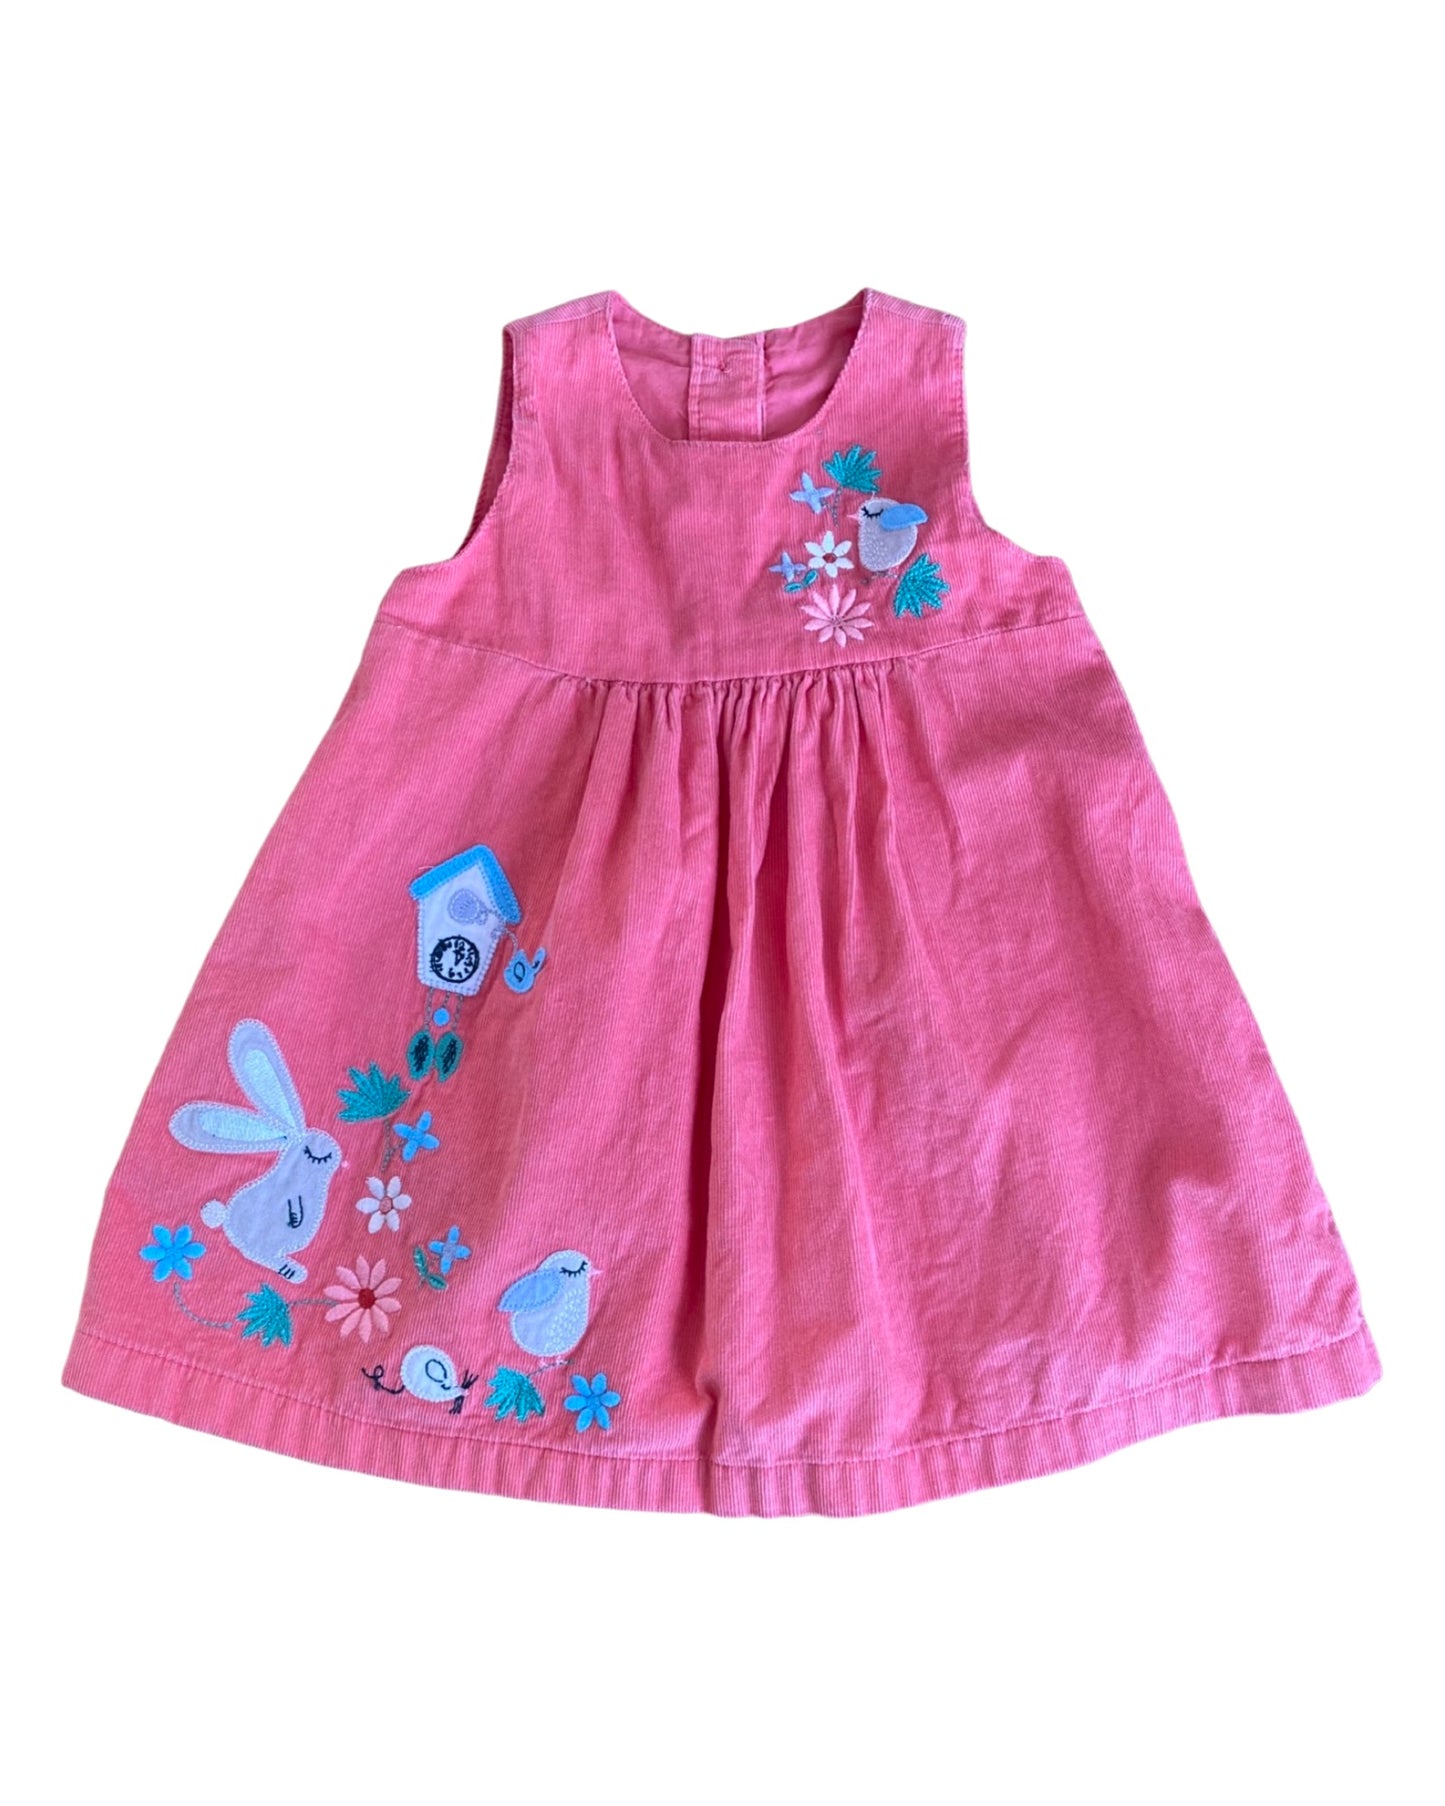 M&S pink needlecord embroidered dress (9-12mths)